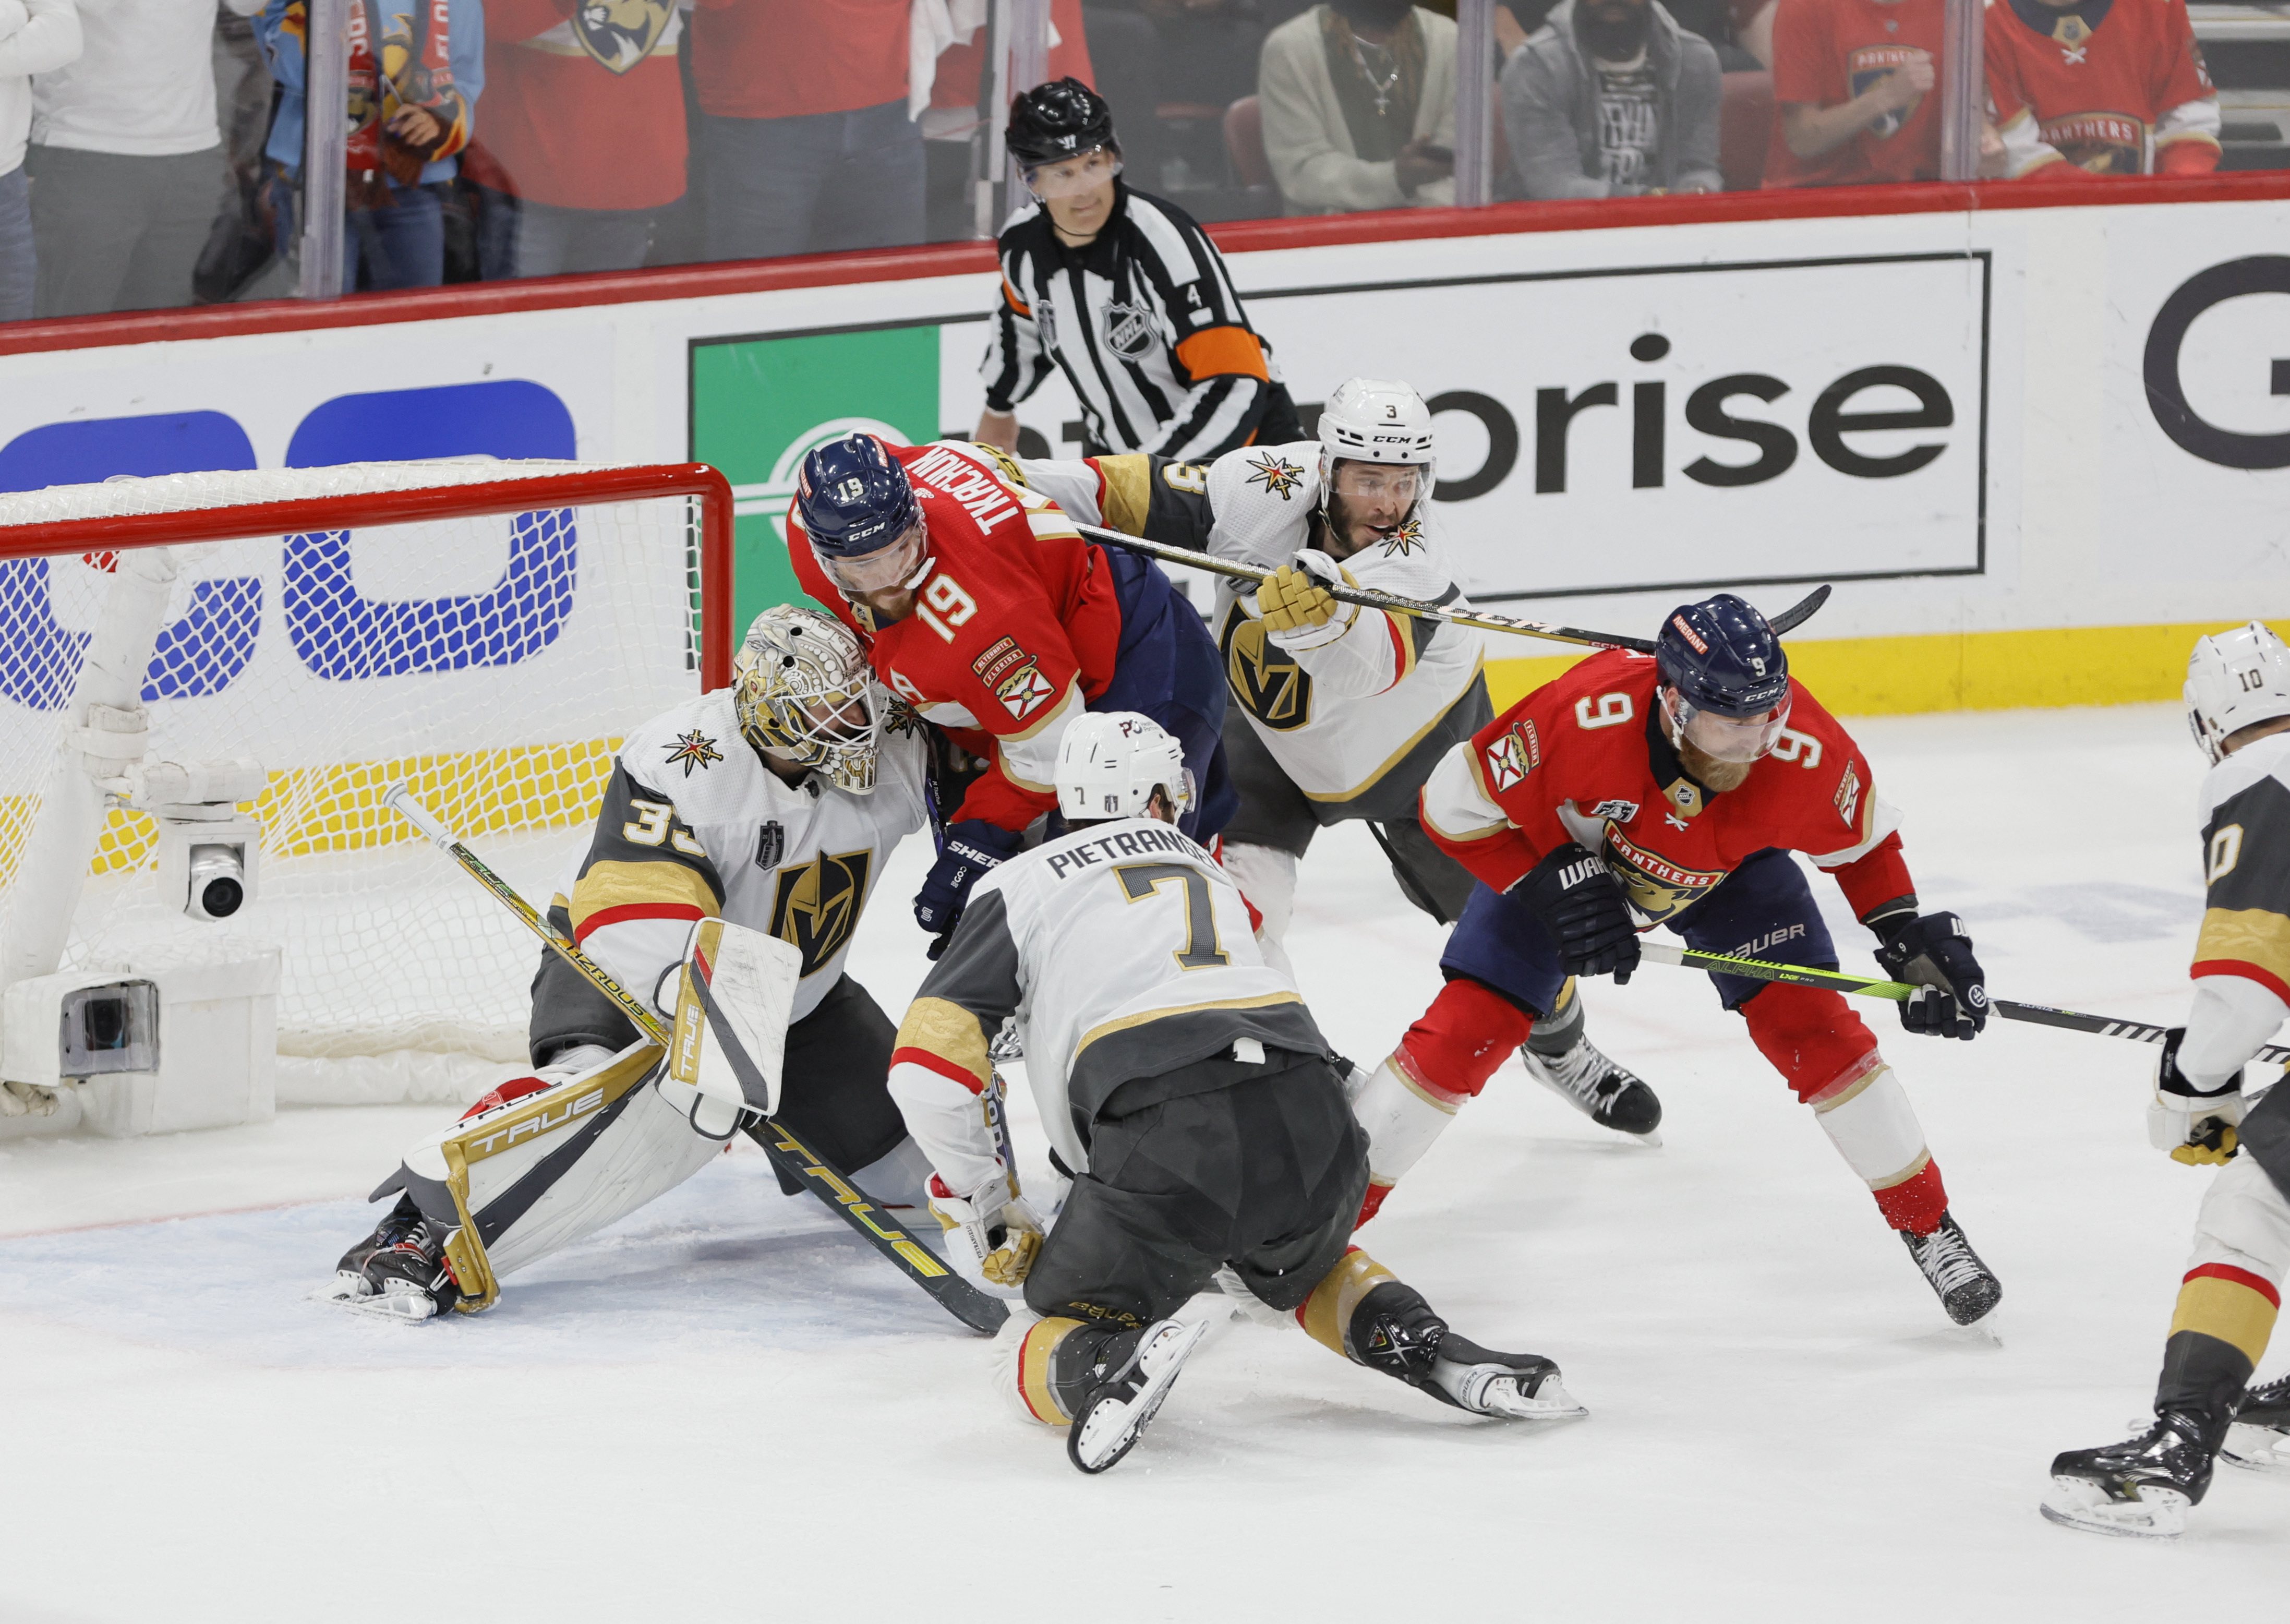 Florida Panthers' Aleksander Barkov Will Win the Hart Trophy in 5 Years